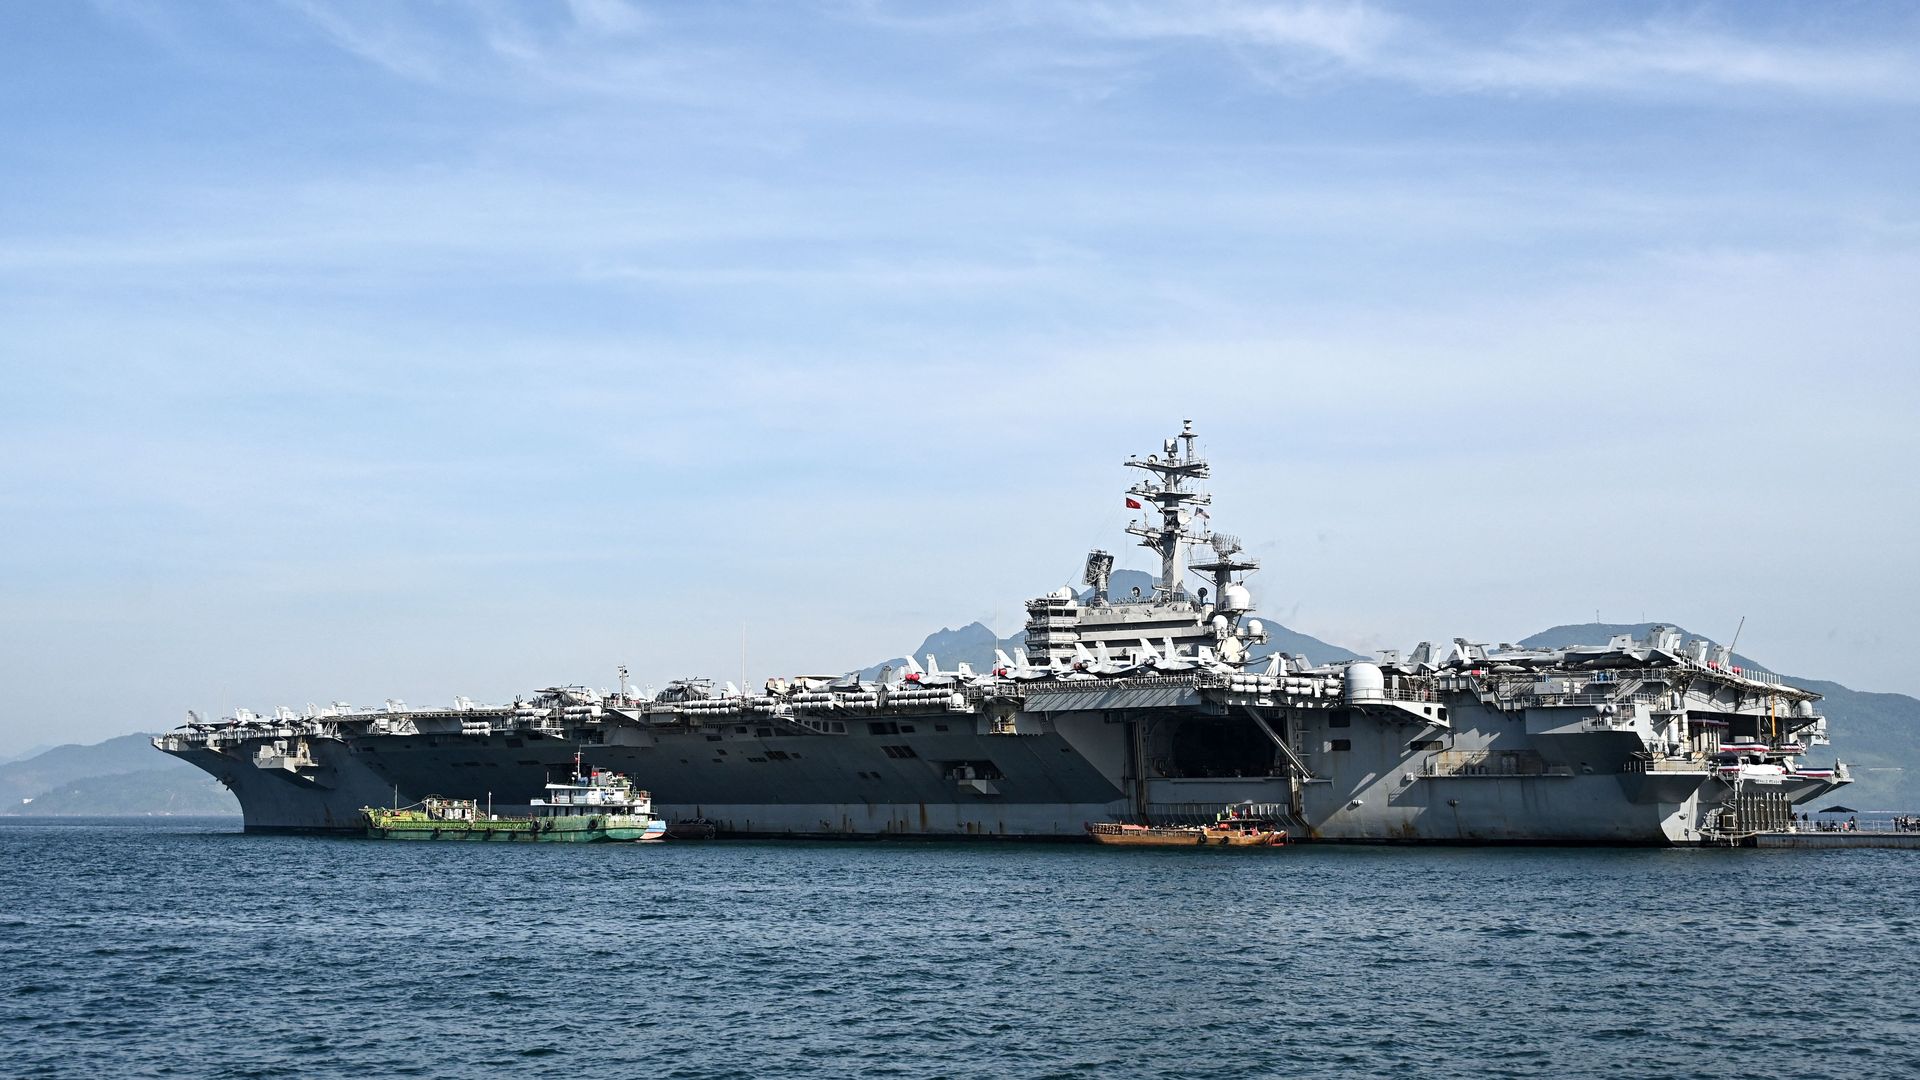 The USS Ronald Reagan, a US Navy Nimitz-class nuclear-powered aircraft carrier, is seen docked at the port during a visit in Danang on June 26